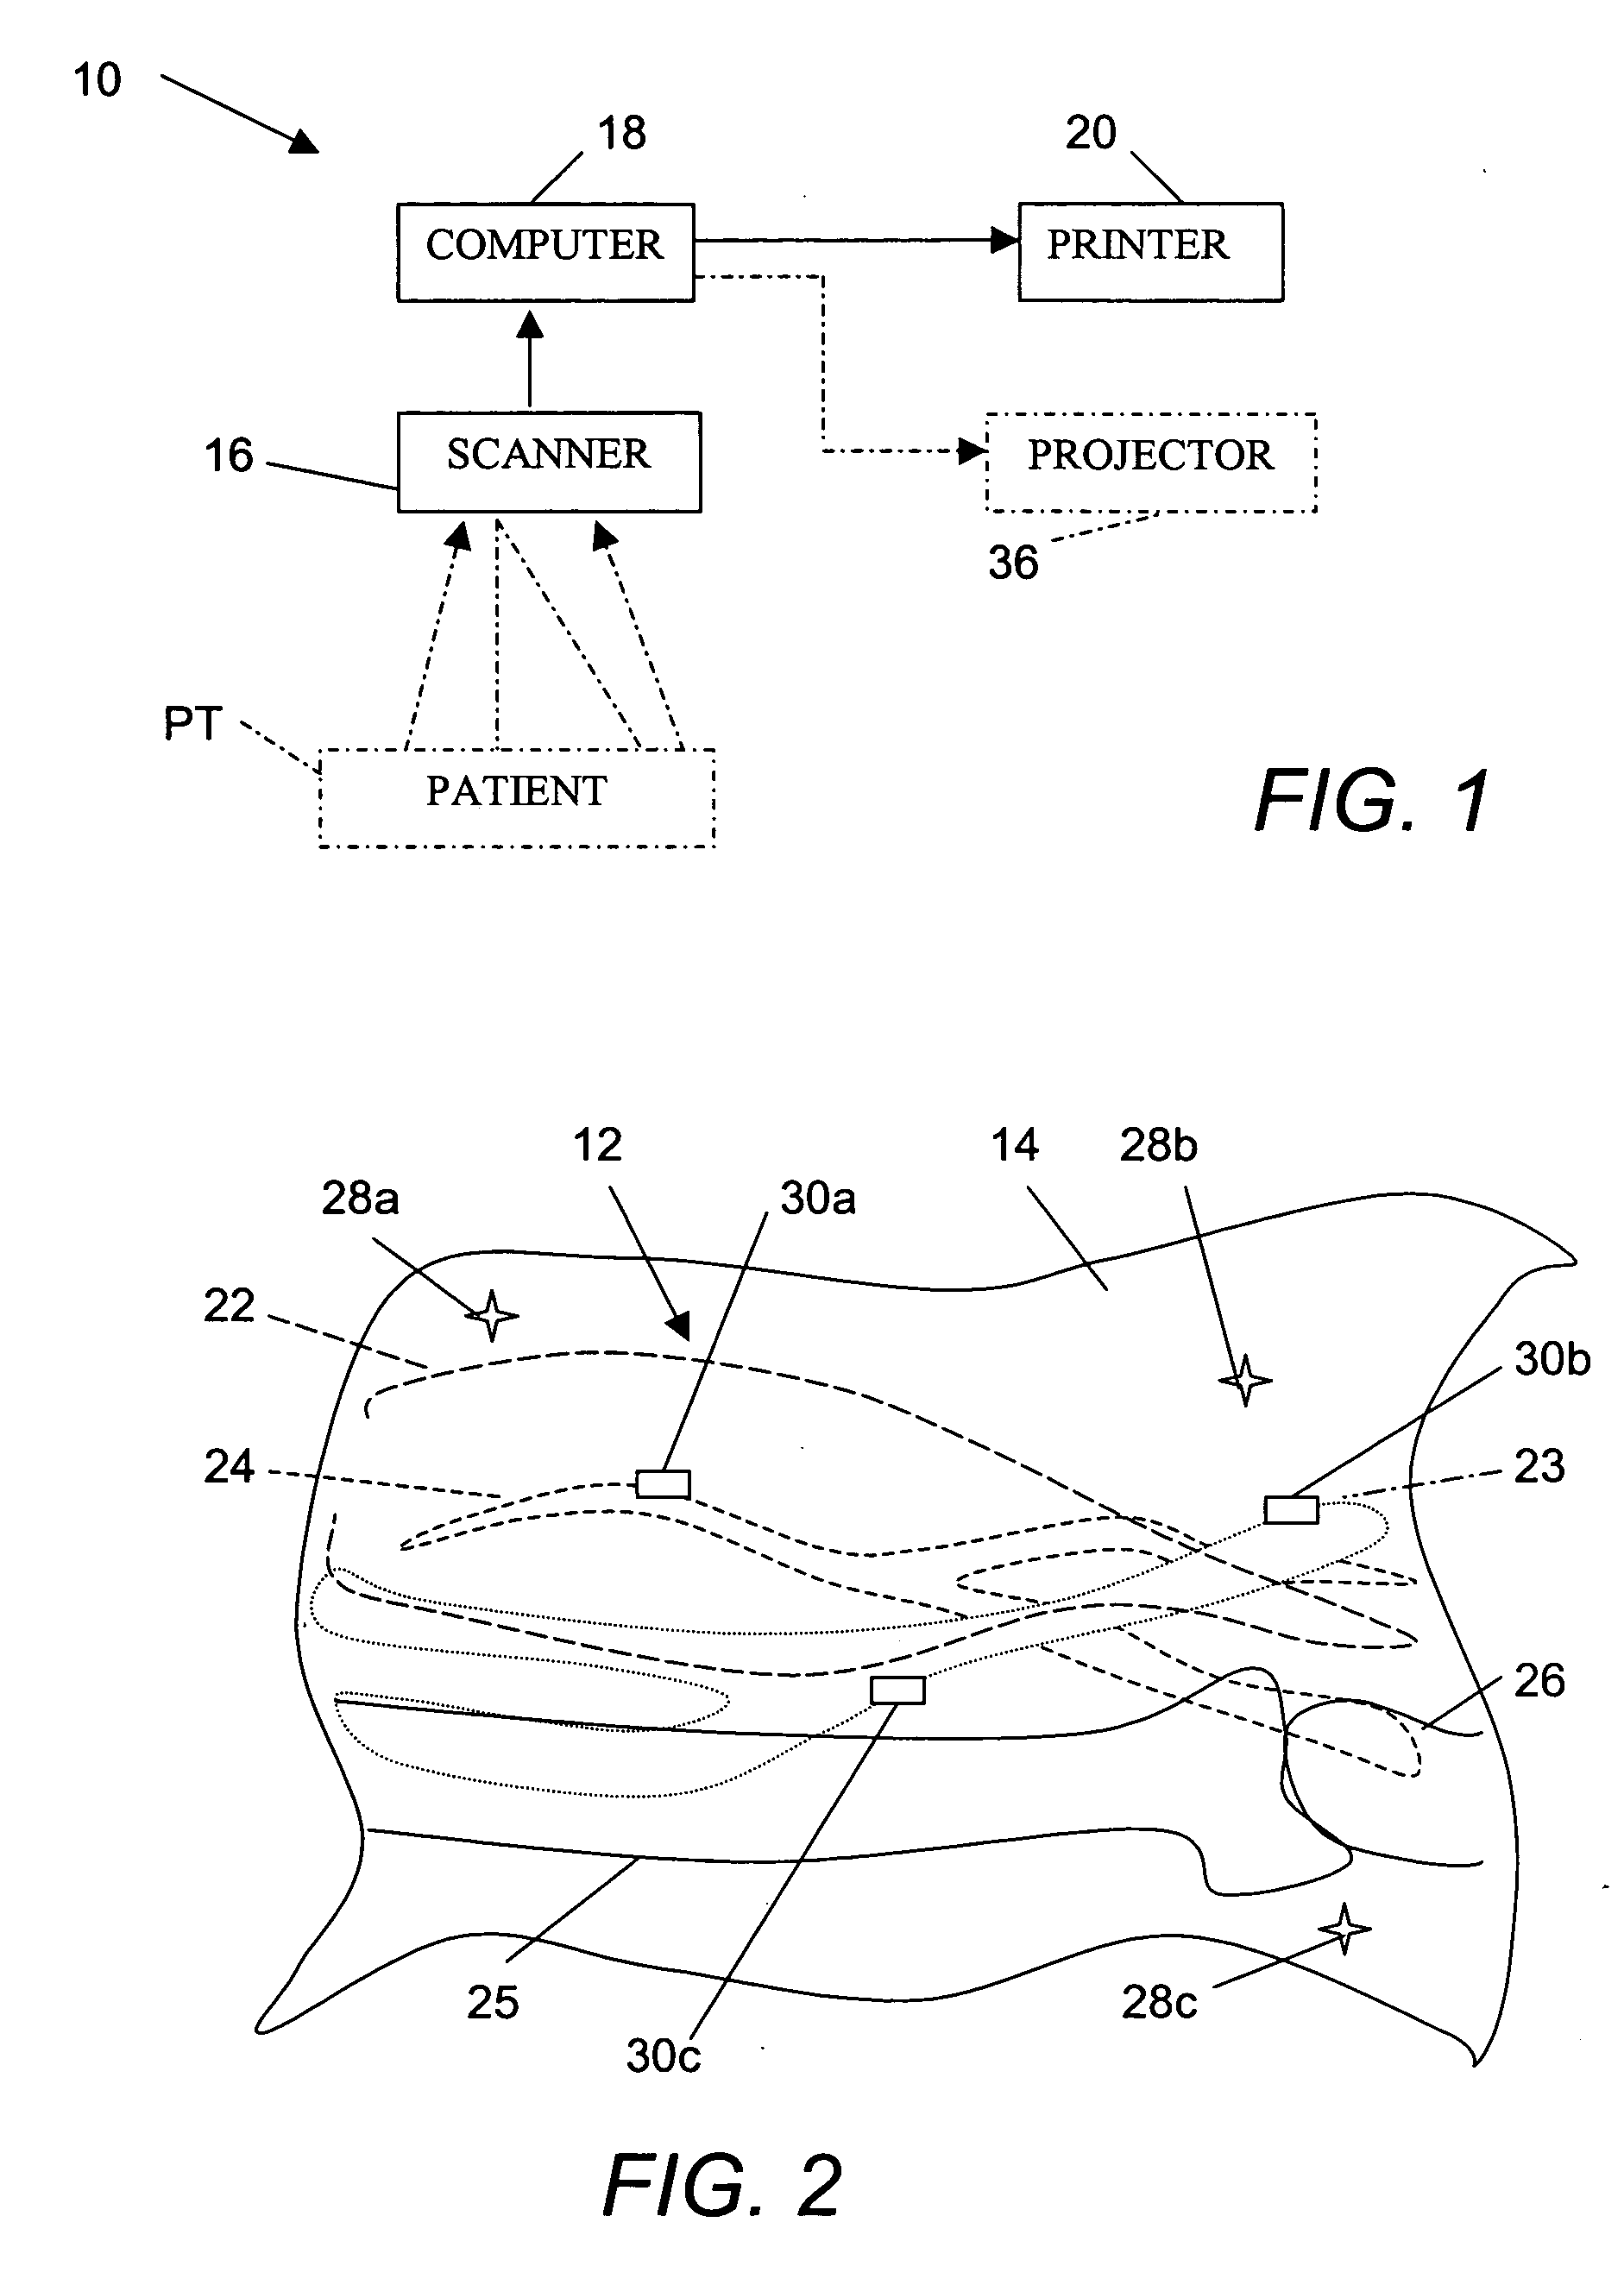 Medical method and associated apparatus utilizable in accessing internal organs through skin surface